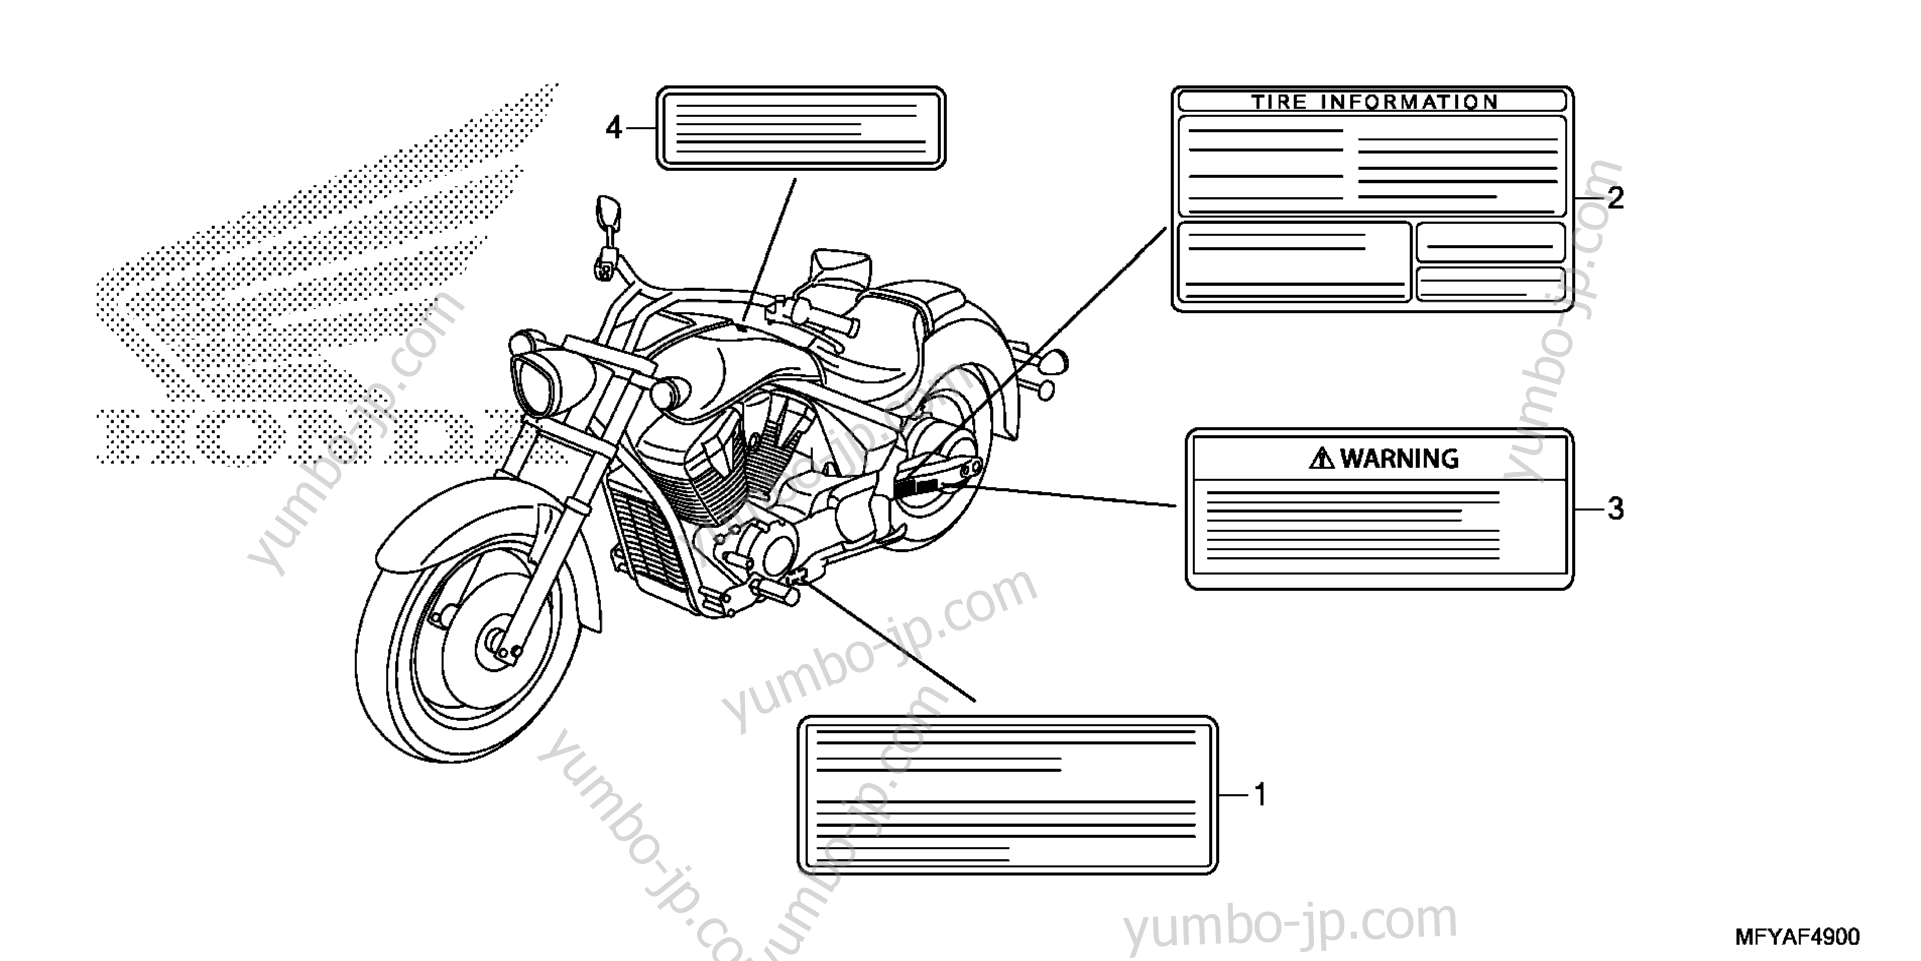 CAUTION LABEL for motorcycles HONDA VT1300CT A 2012 year